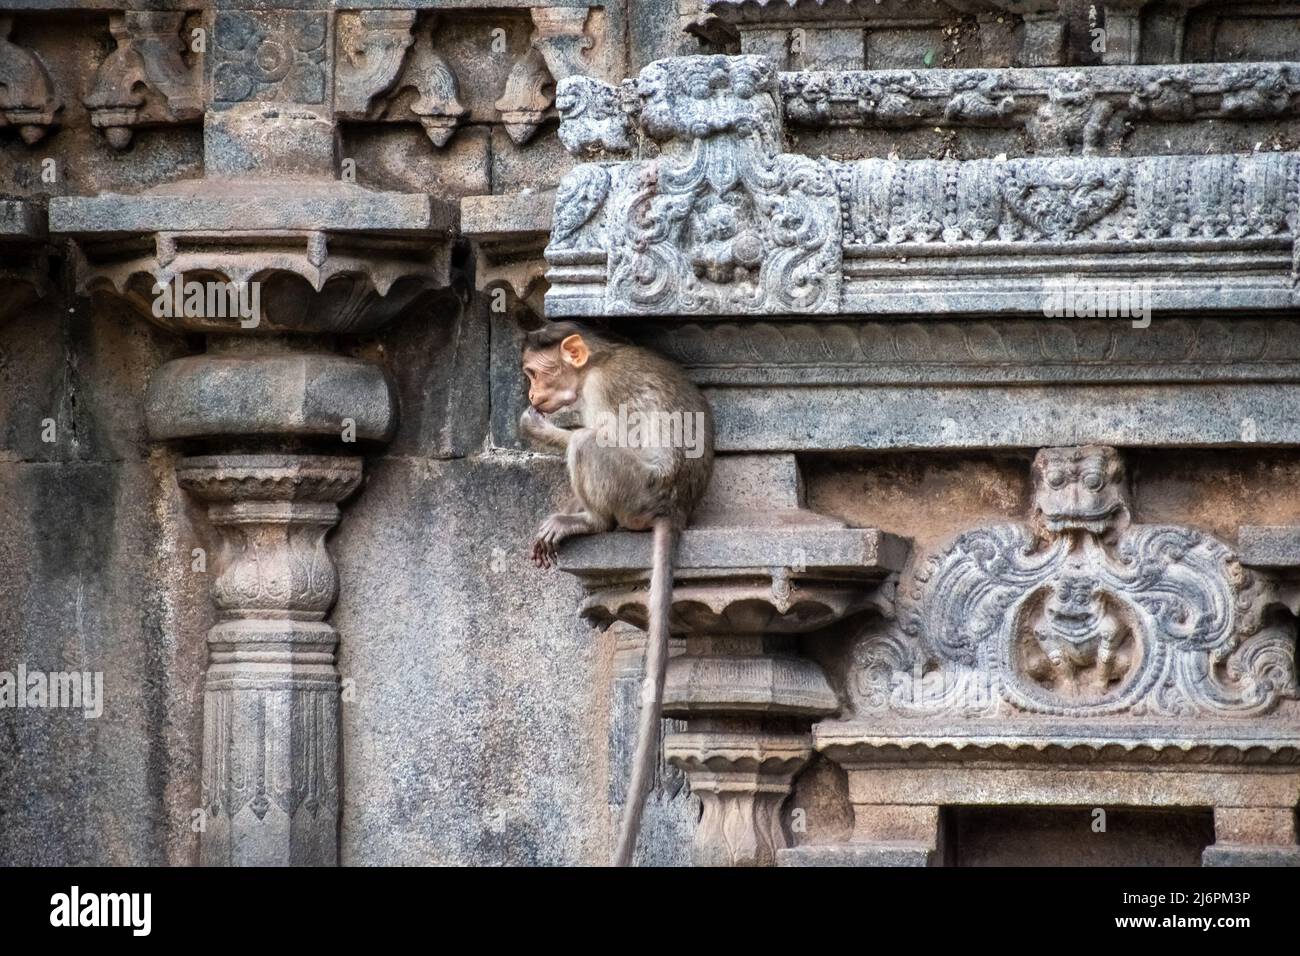 A young rhesus macaque monkey sitting on a stone wall in the ancient Hindu temple of Jalakandeswarar in the town of Vellore. Stock Photo